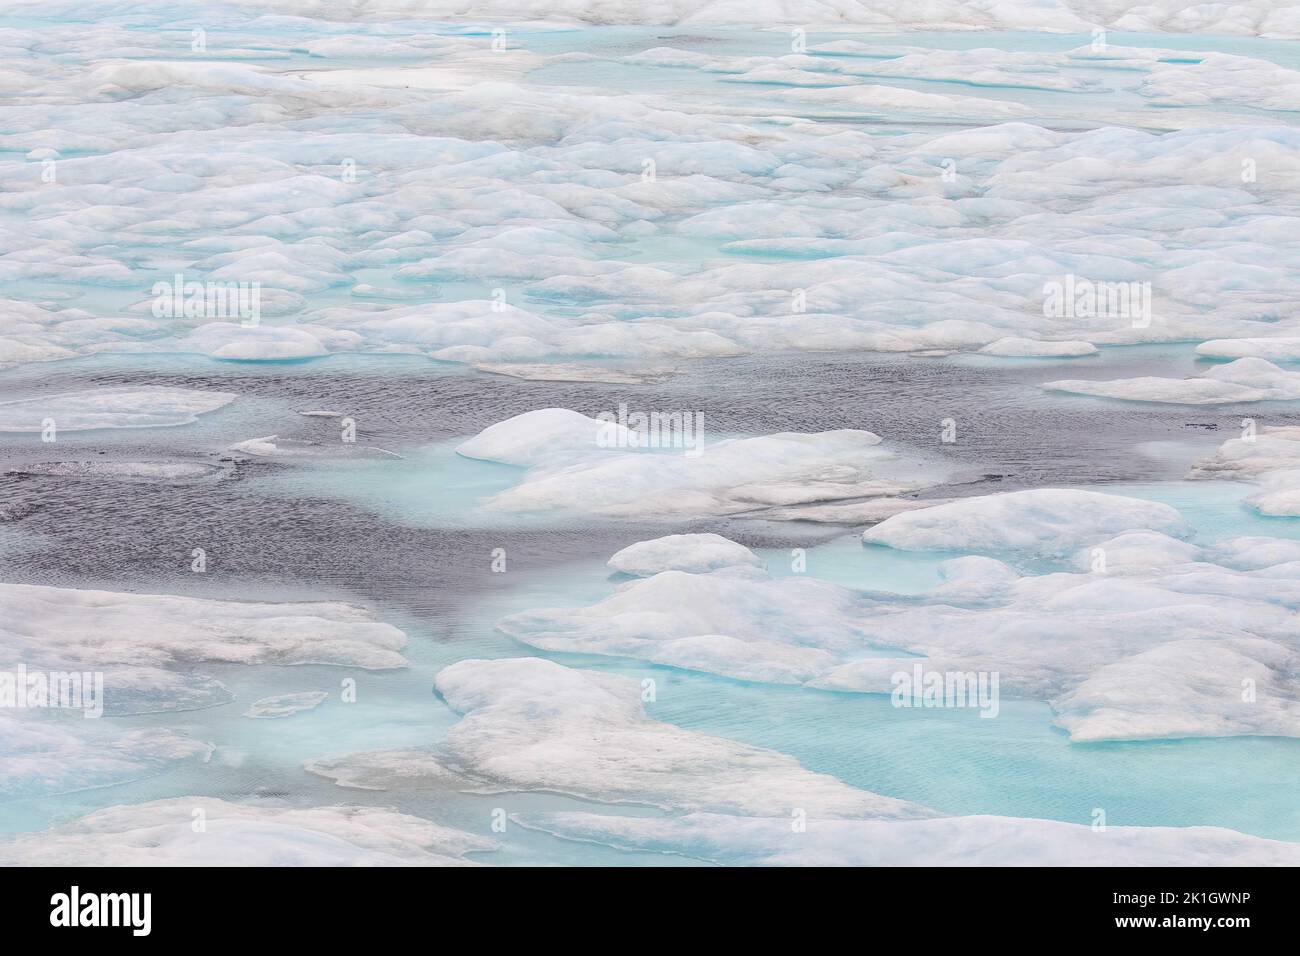 Abstract landscape with pools of aqua water in ice floes of high arctic. Stock Photo